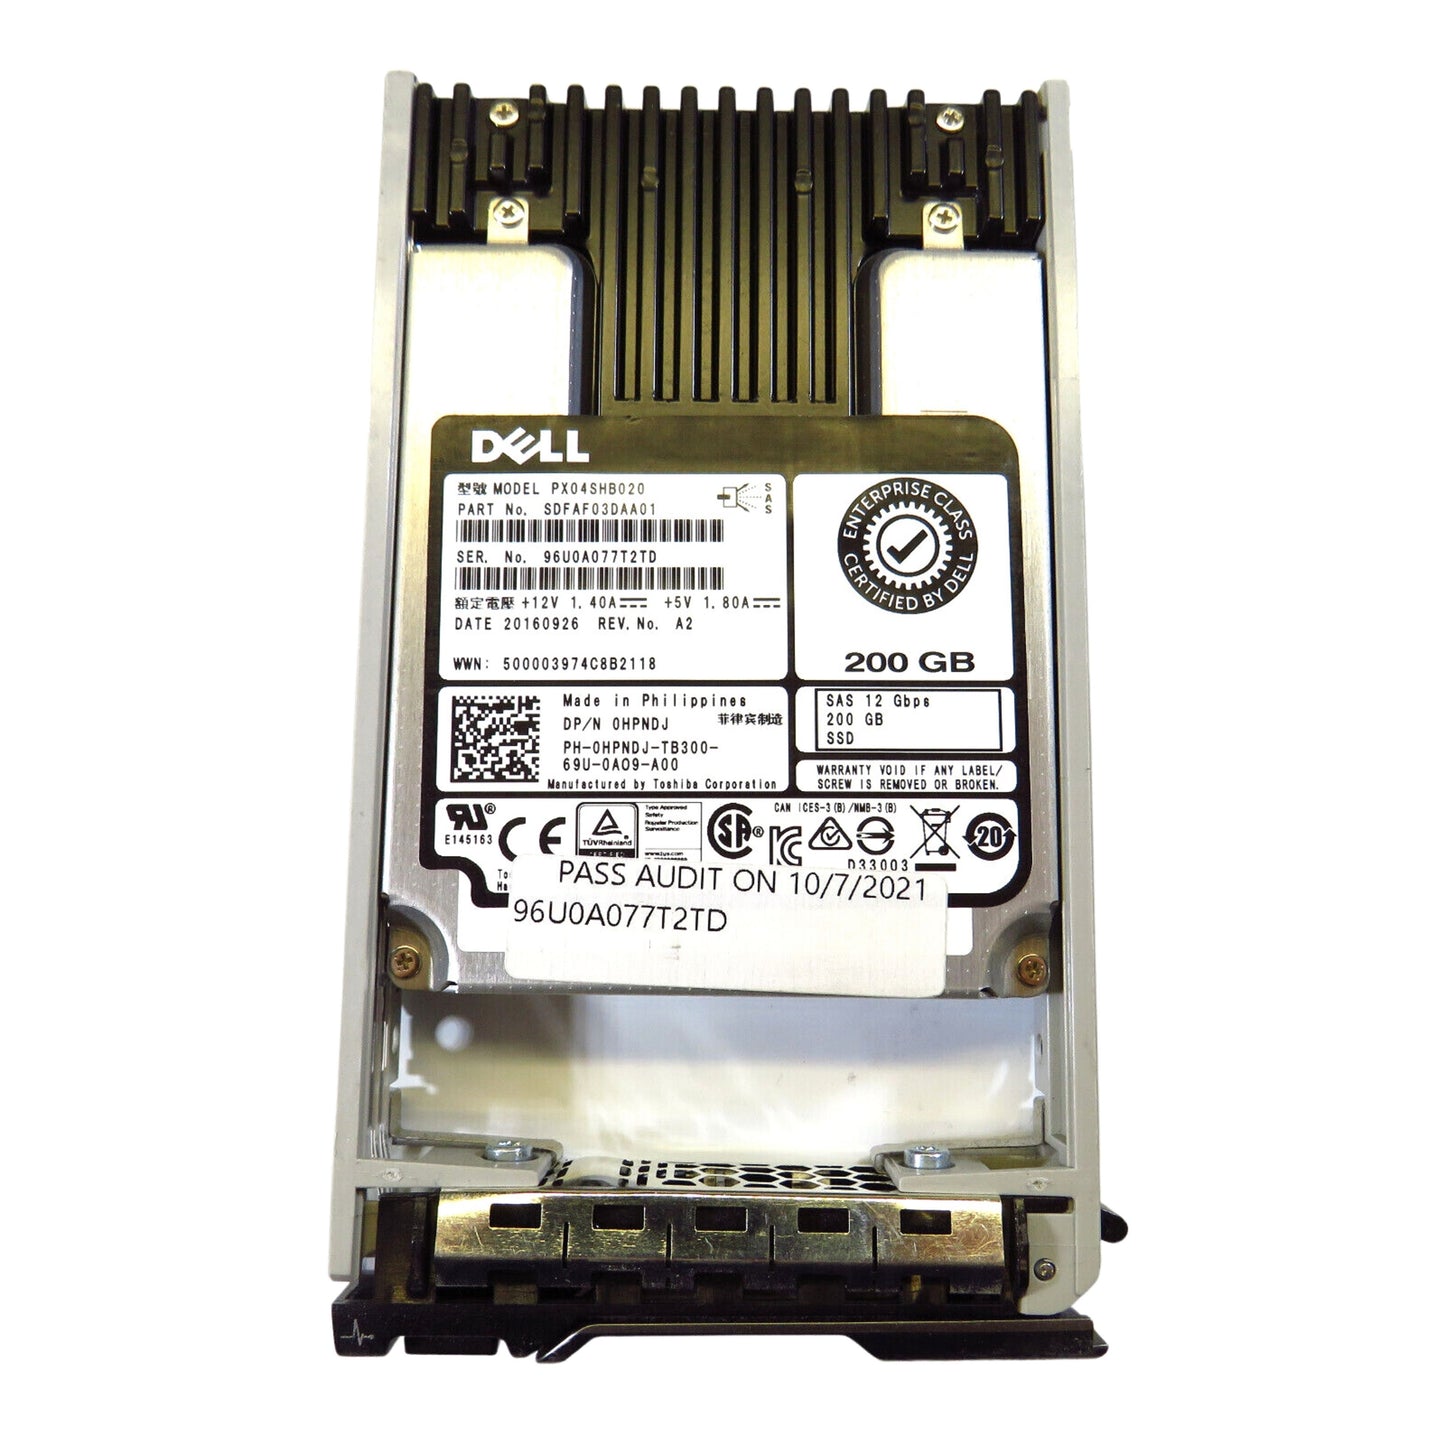 Dell HPNDJ 200GB 2.5" SAS 12Gbps SSD Solid State Drive (Refurbished)